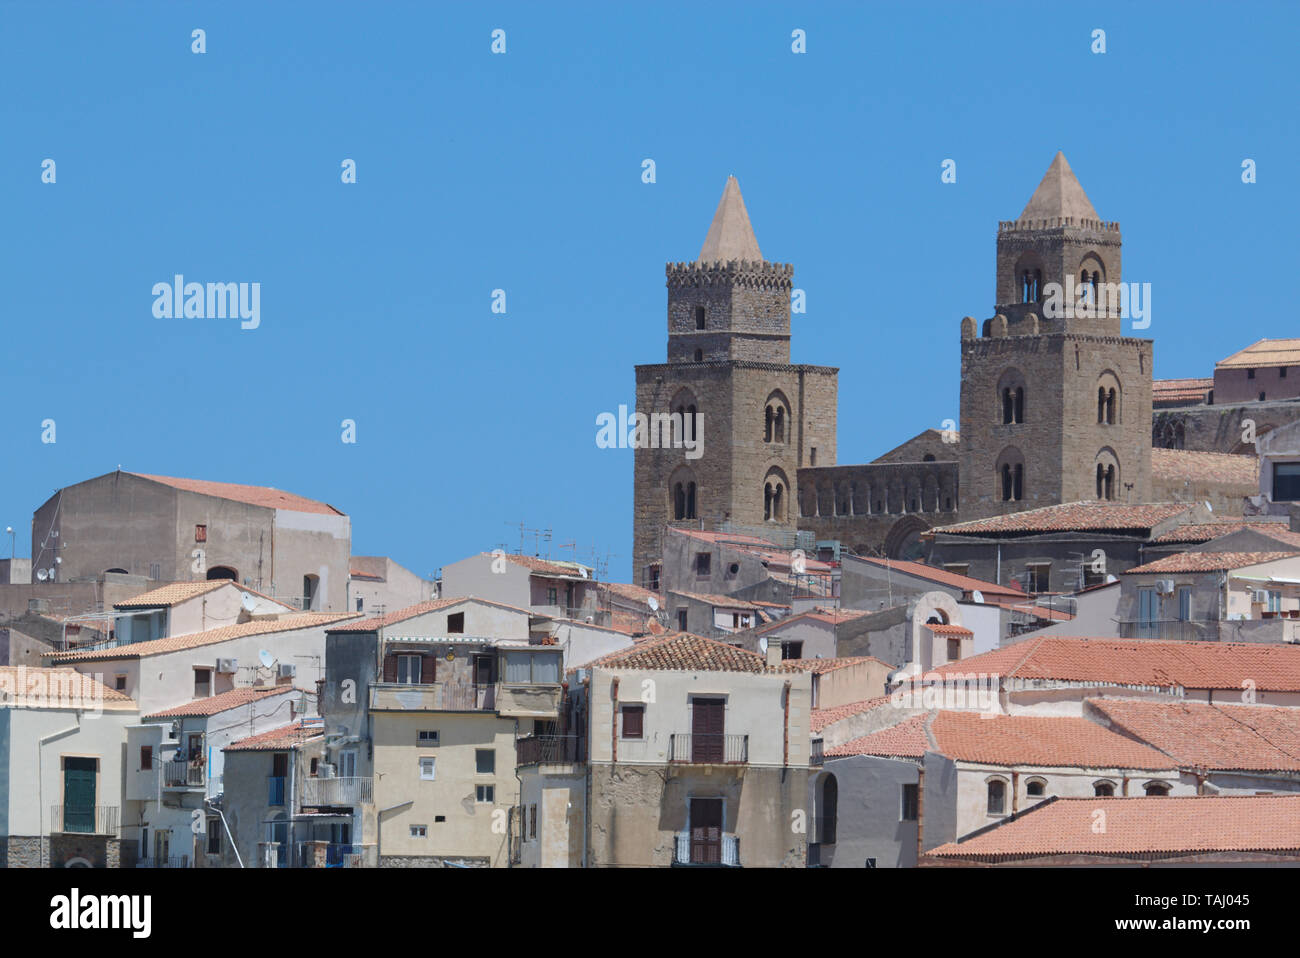 View of the cathedral in Cefalu, Italy Stock Photo